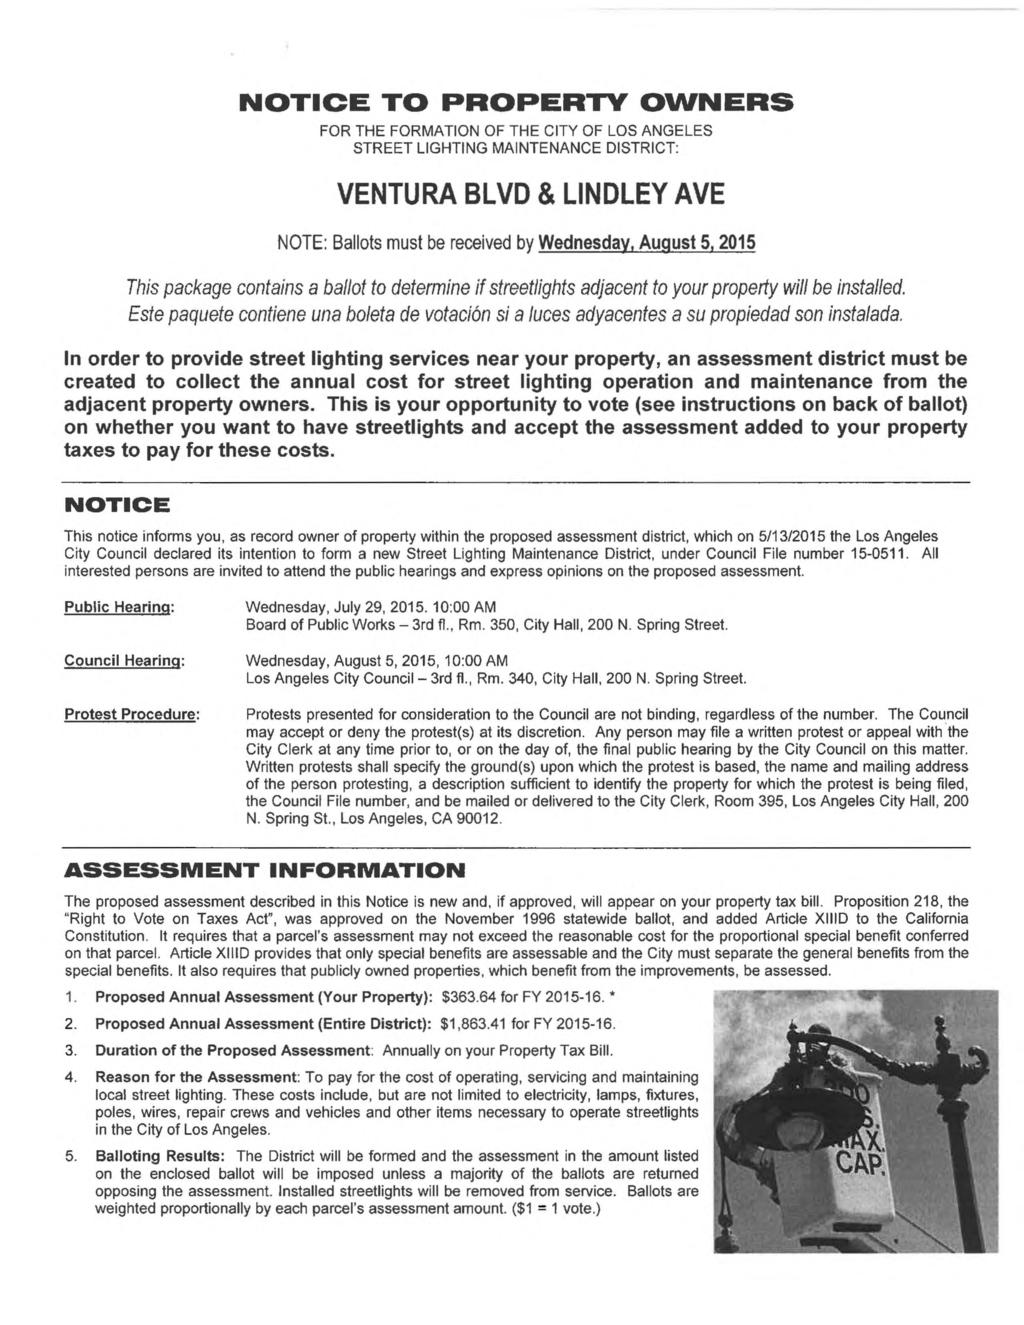 NOTICE TO PROPERTY OWNERS FOR THE FORMATION OF THE CITY OF LOS ANGELES STREET LIGHTING MAINTENANCE DISTRICT: VENTURA BLVD & LINDLEY AVE NOTE: Ballots must be received by Wednesday, August 5,2015 This